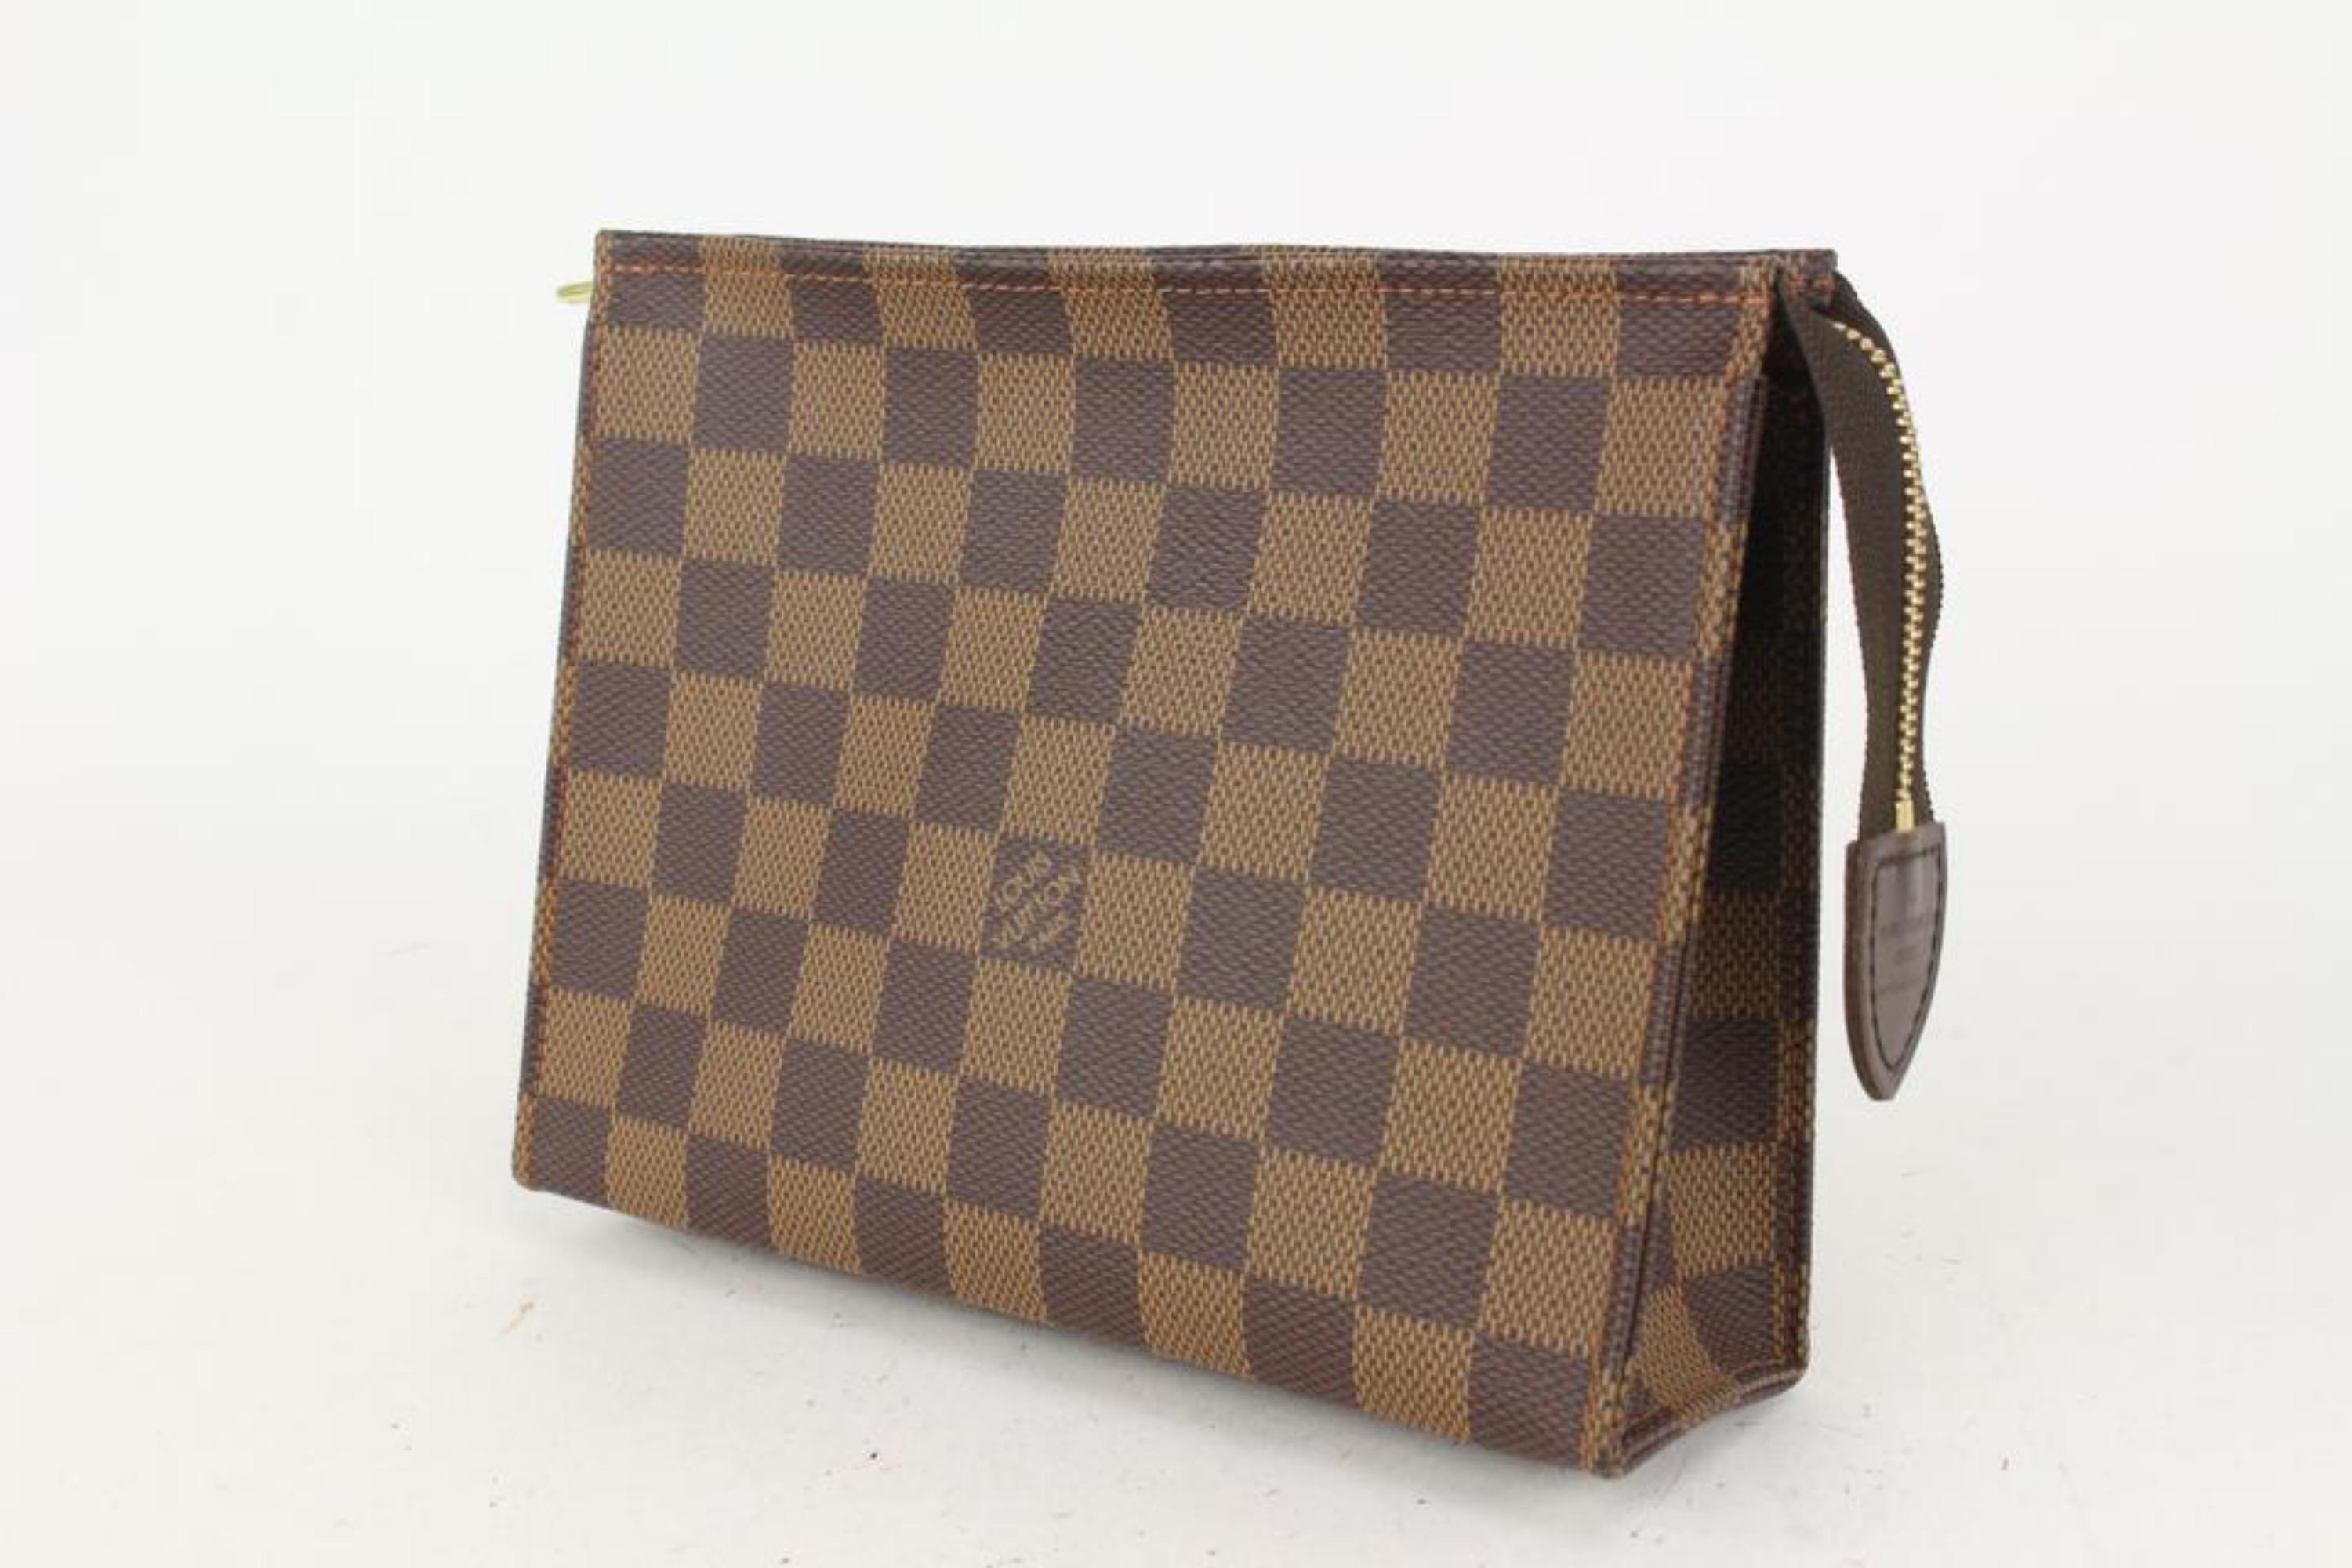 Louis Vuitton Ultra Rare Special Order Damier Ebene Toiletry Pouch 19 Poche 0L44V
Date Code/Serial Number: DU0025
Made In: France
Measurements: Length:  7.2